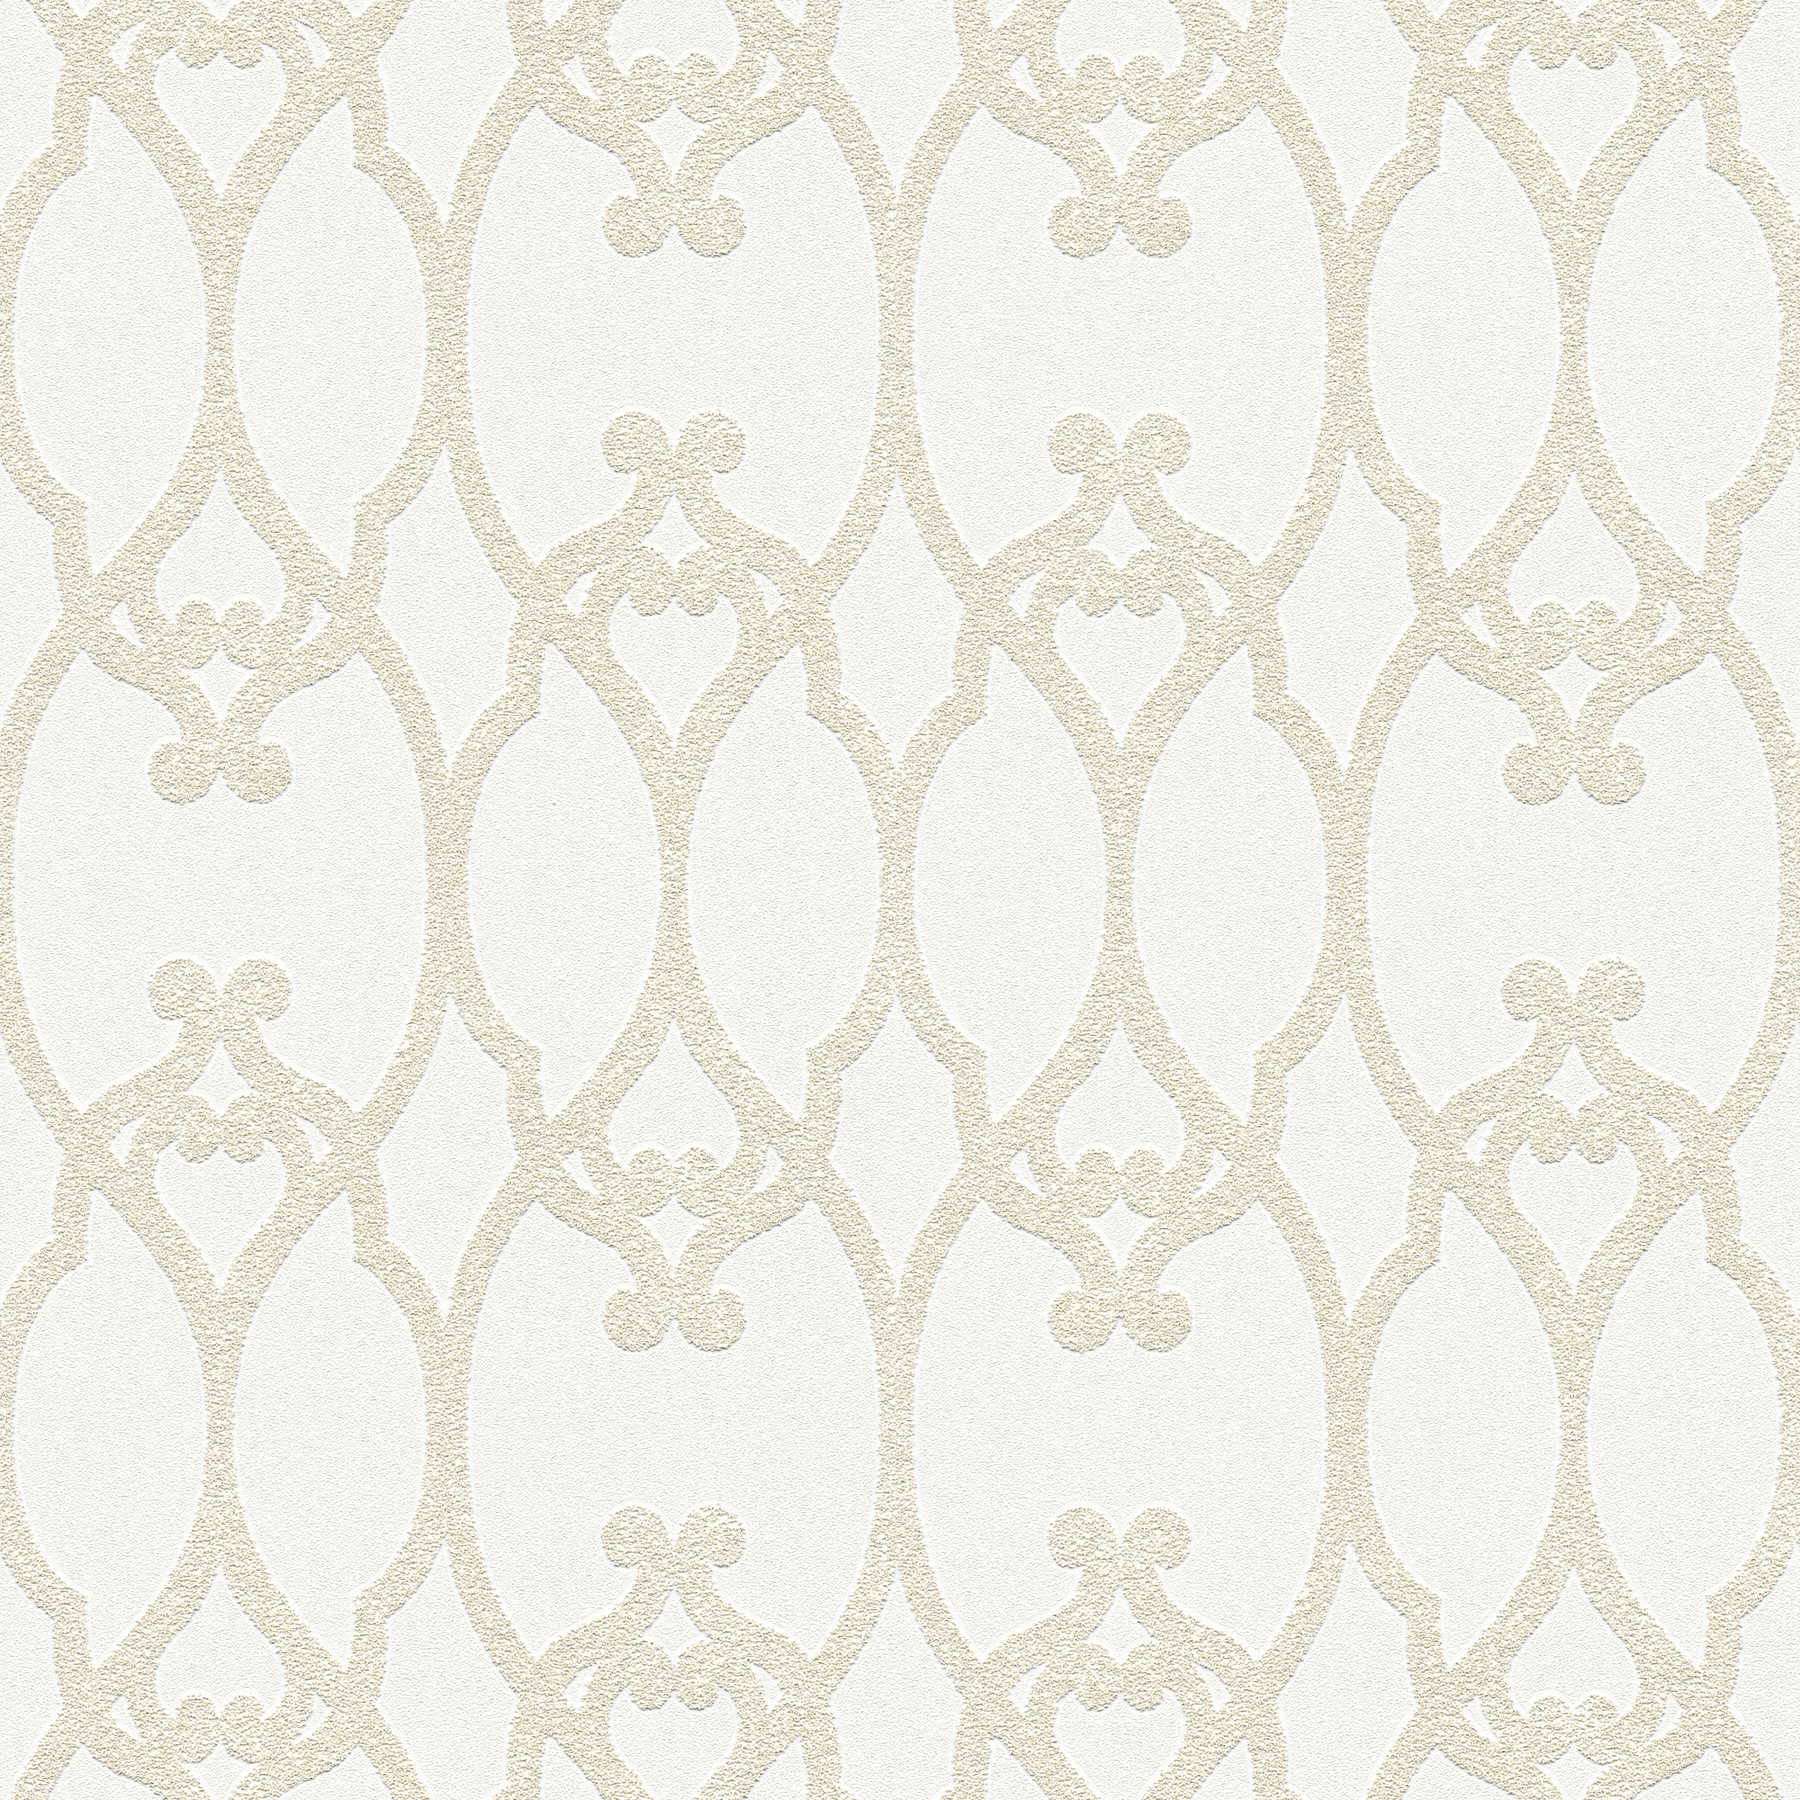 Ornament wallpaper with baroque pattern paintable - white
